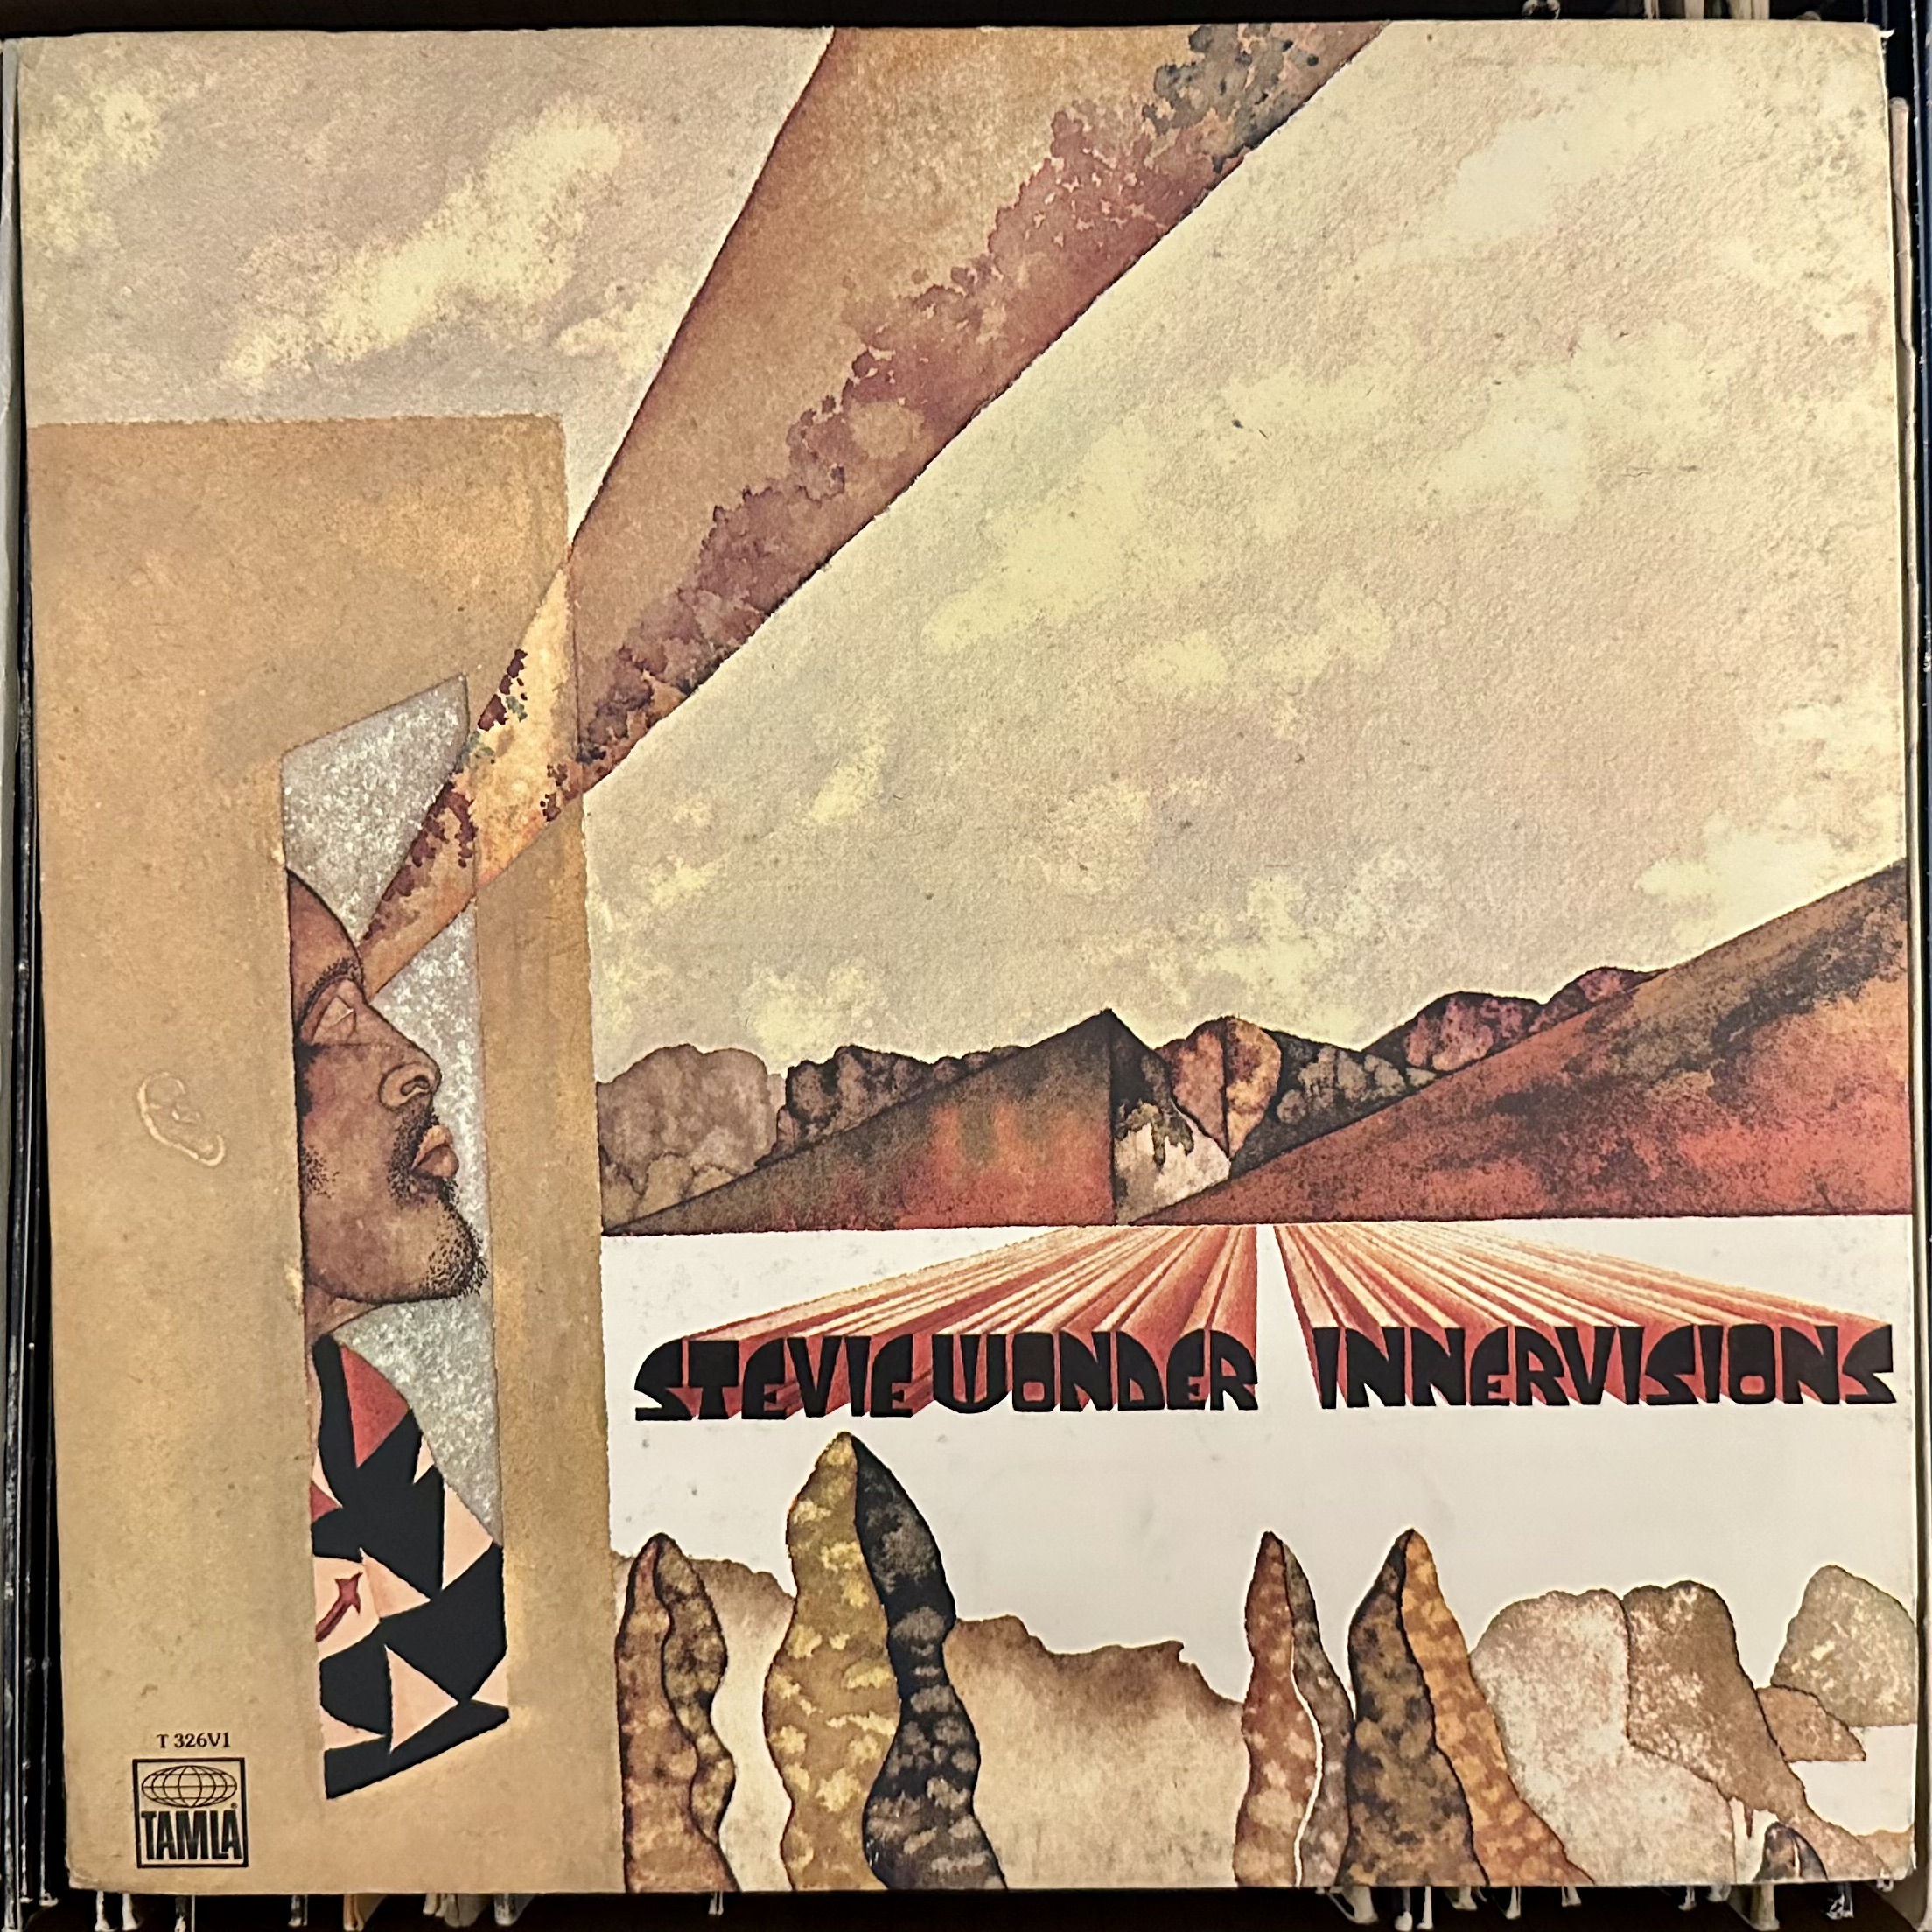 Innervisions by Stevie Wonder